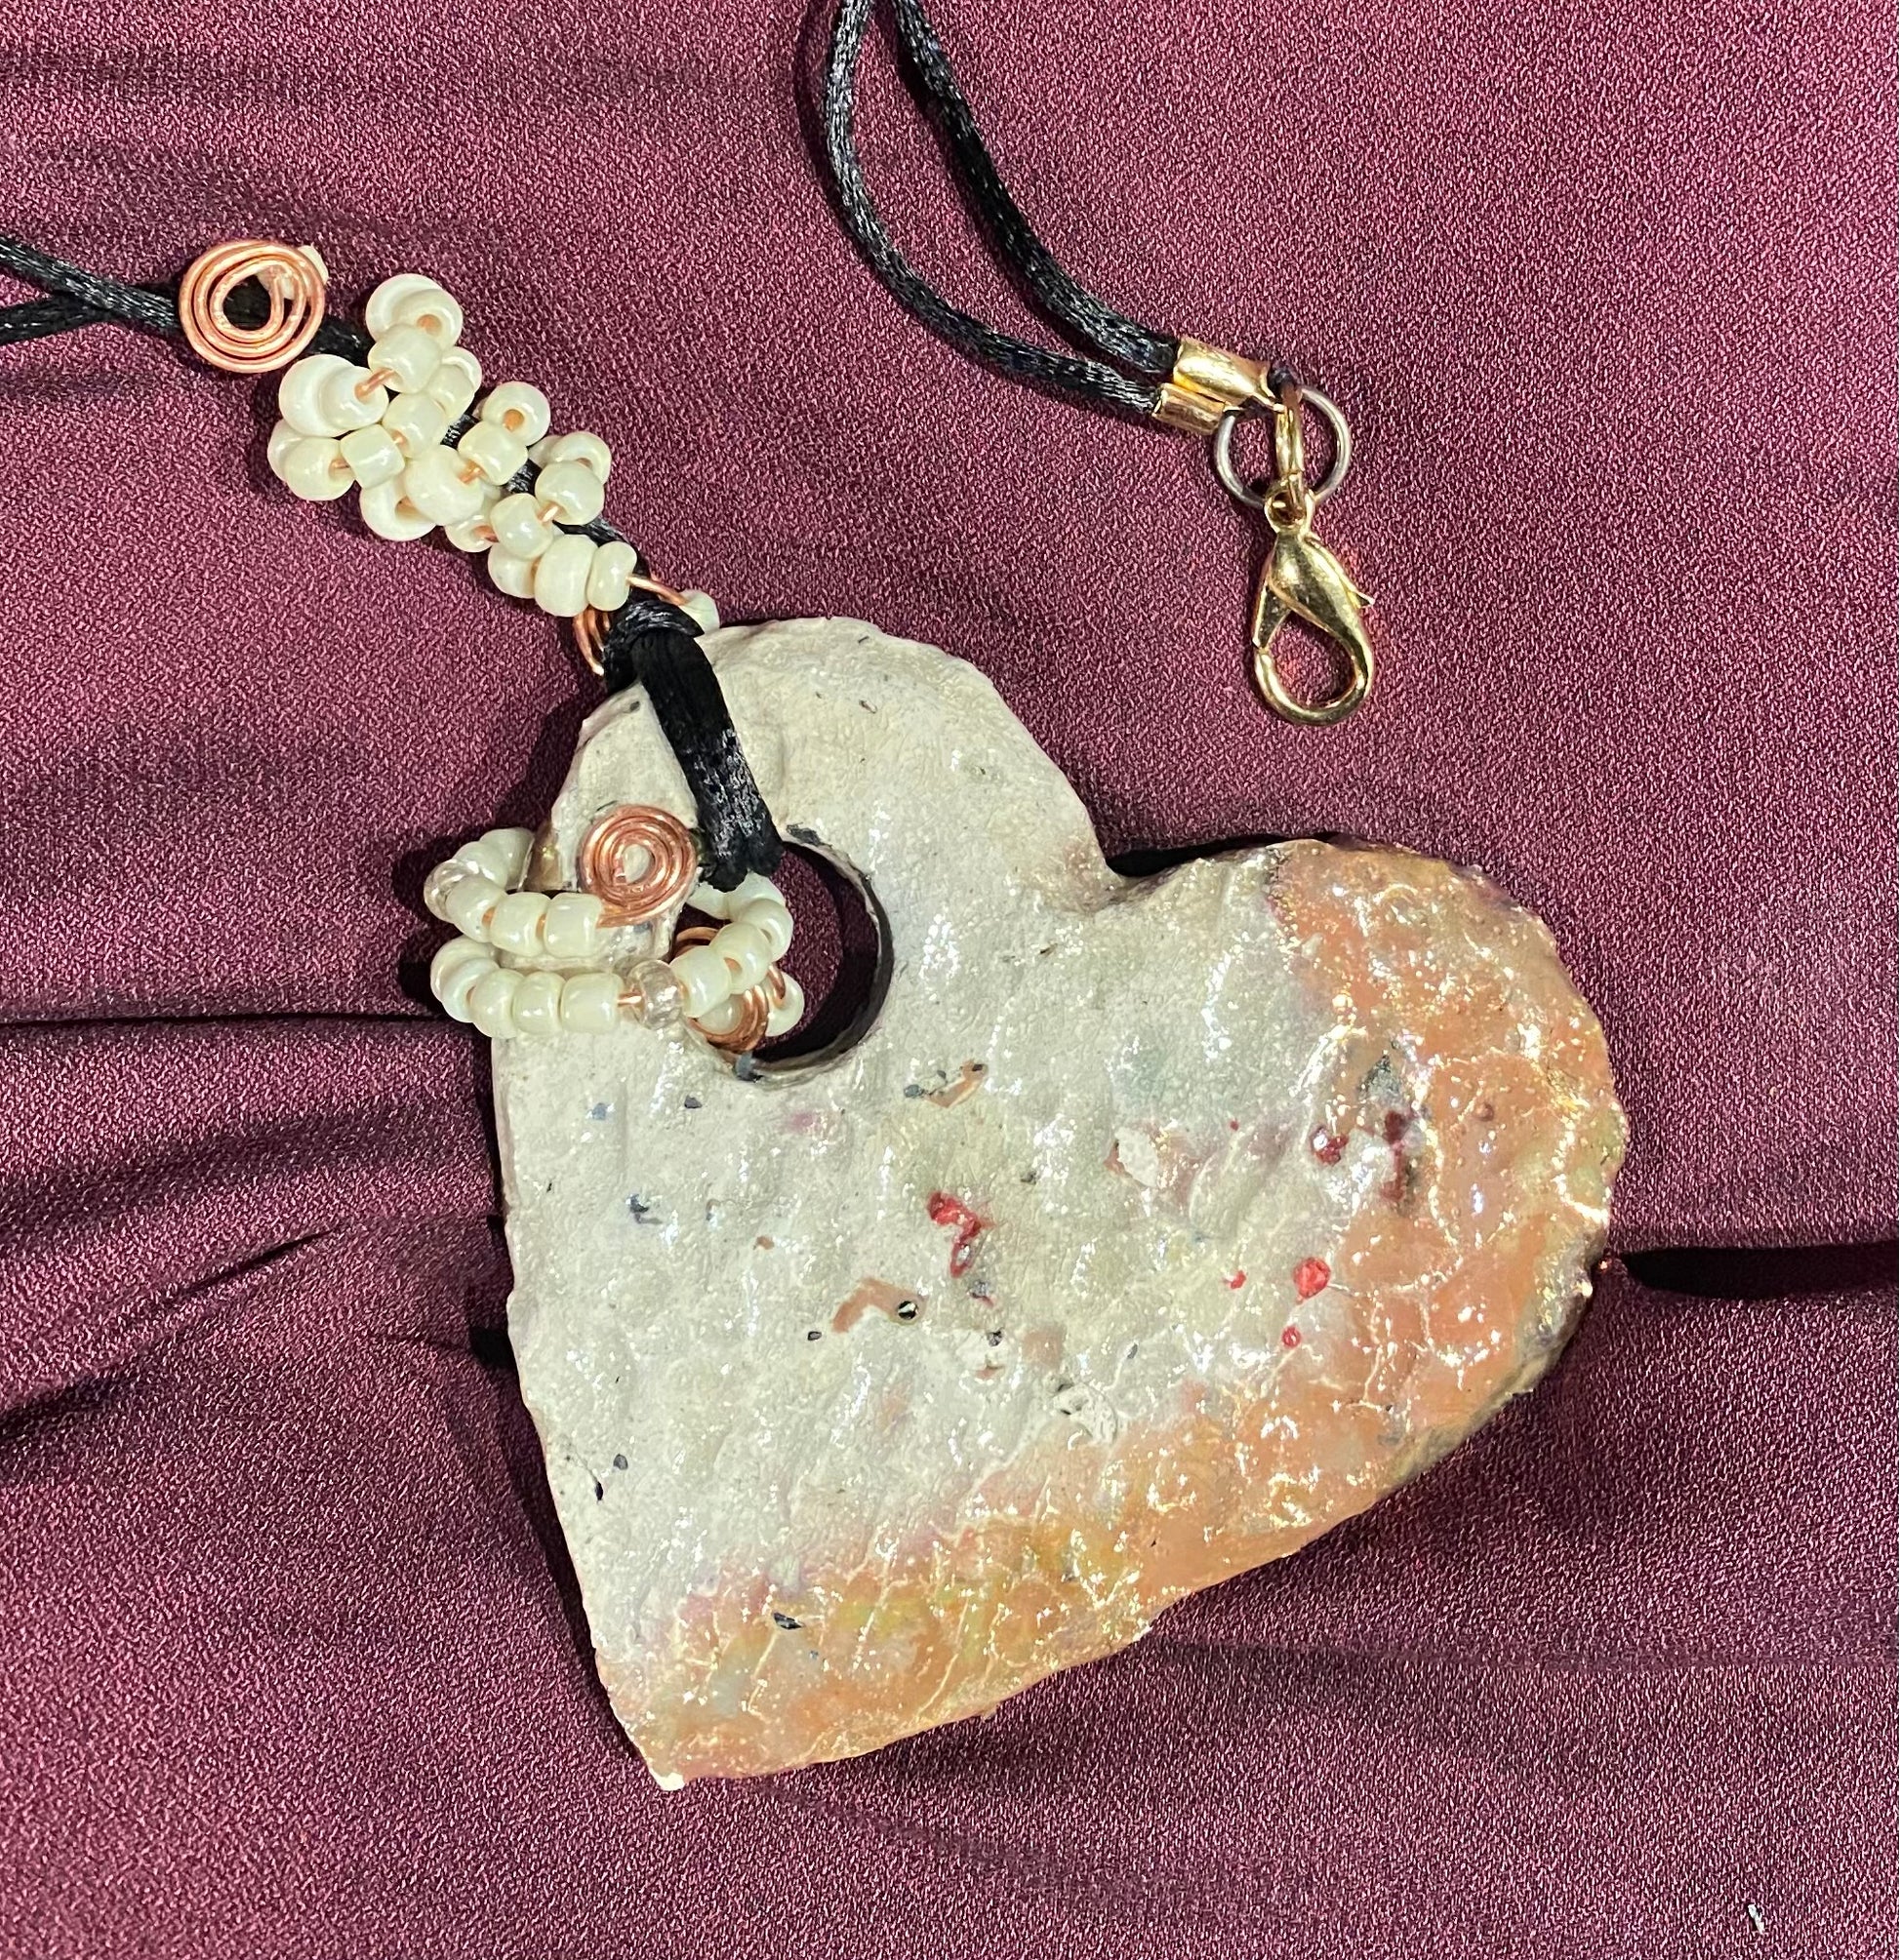 Have A Heart ! Each heart pendant is handmade with love! It is 3" x 3" and weighs approx. 3ozs. It has white metallic raku glazes that renders a unique translucent  patina. The heart is textured and holds a  spiral of white pony beads on copper wire.  This pendant has a nice 12"black rattail cord!